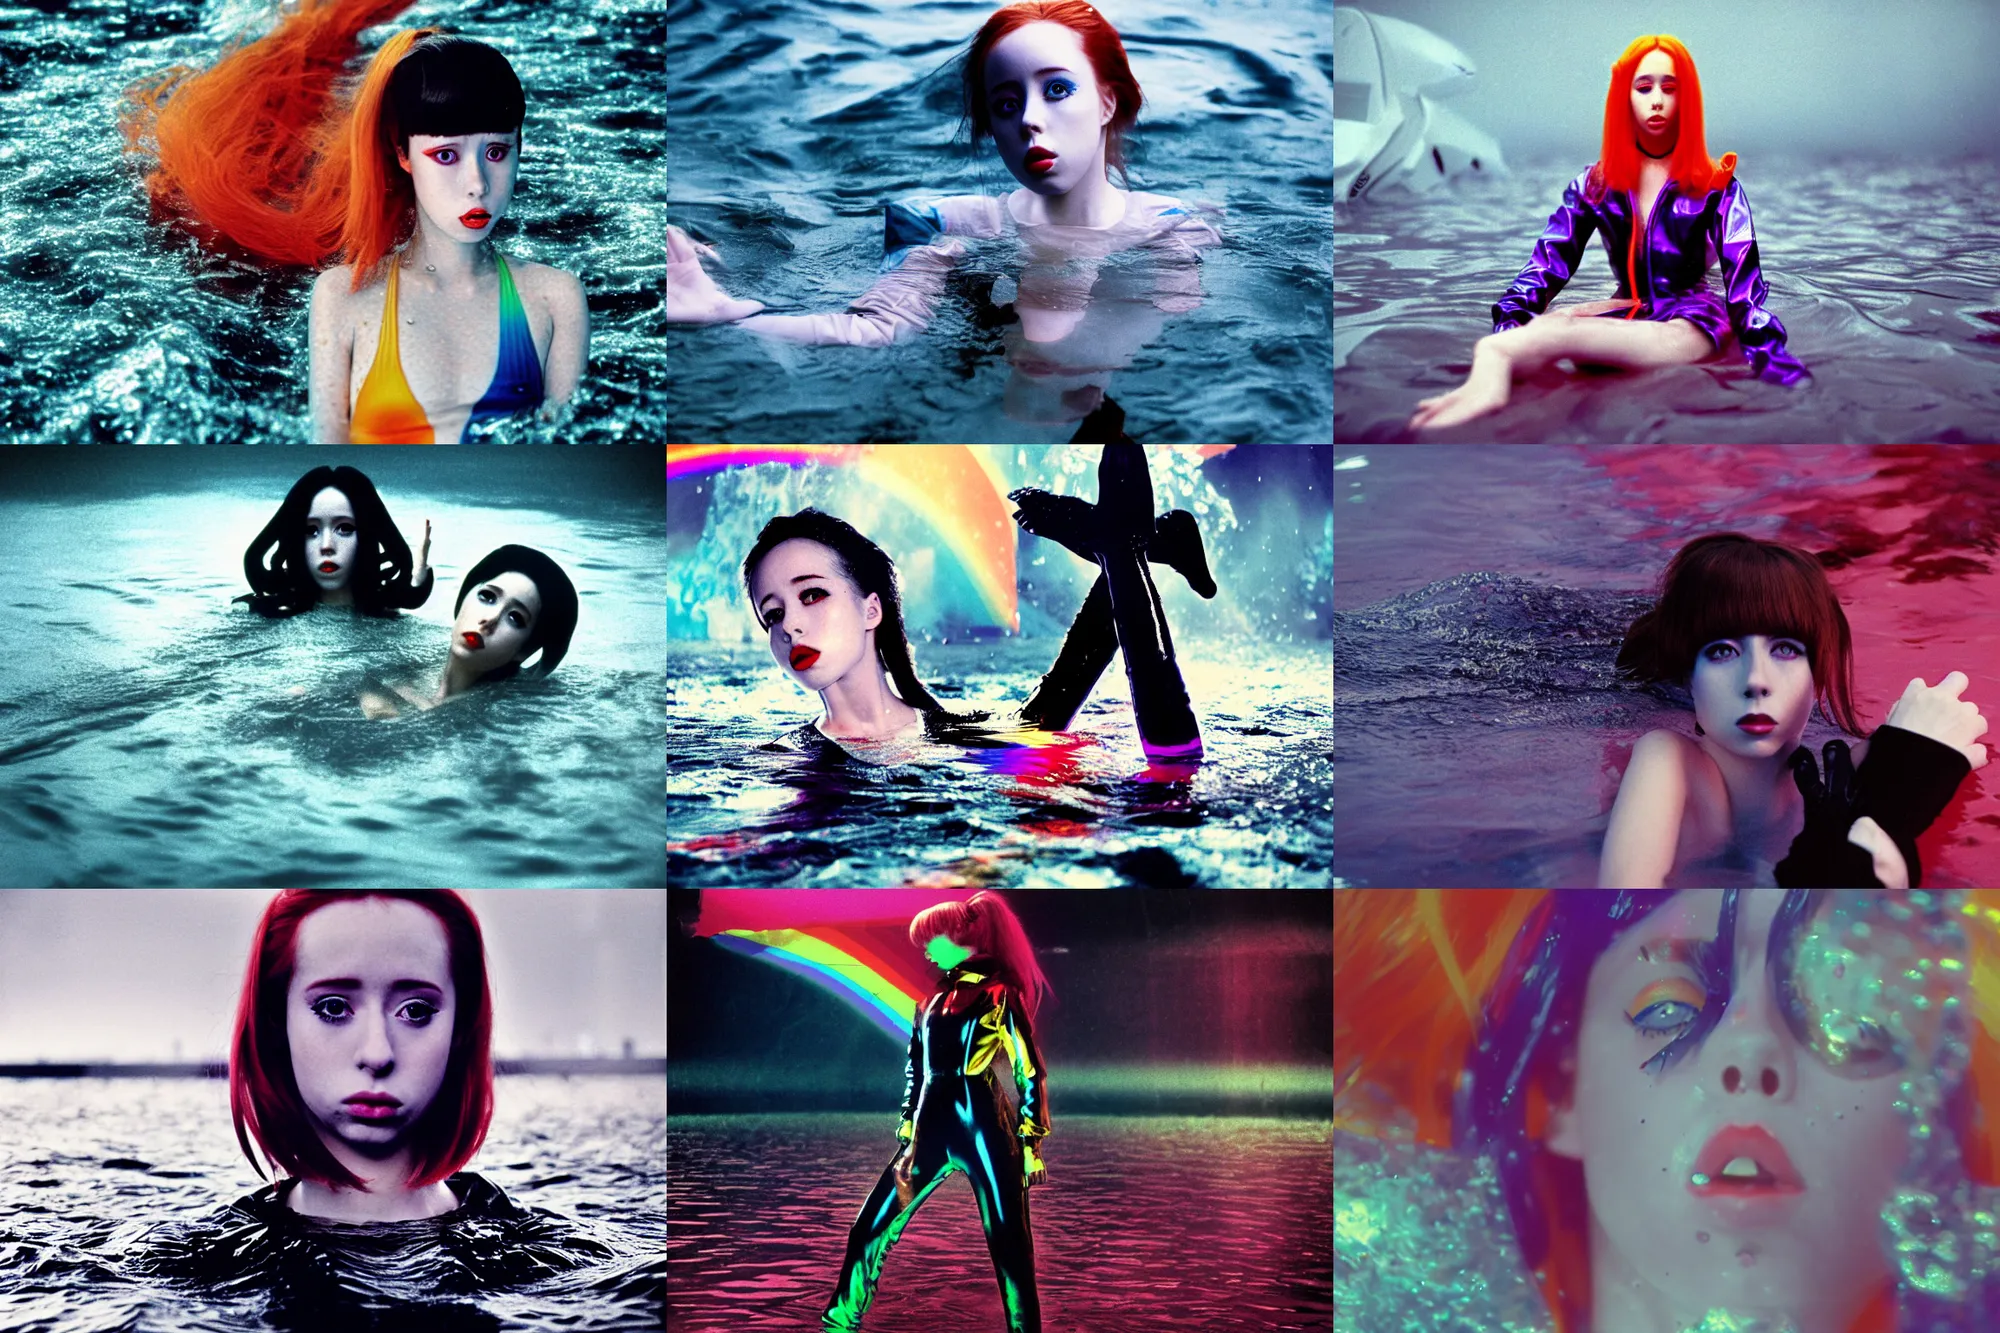 Prompt: Beautiful Holly Herndon style occult seinen manga Fashion photography portrait tokyo top gun(1980) movie still from underwater space dance scene of model, wearing refracting rainbow diffusion wet plastic Balenciaga designed specular highlights anti-g flight jump suit, half submerged in heavy nighttime floods, water to waist, , épaule devant pose;pursed lips;athletic; pixie hair,eye contact, ultra realistic, Panavision Panaflex X , Technicolor, 8K, 35mm lens, three point perspective, tilt shift mirror kaleidoscope orbs background, extreme closeup portrait, chiaroscuro, highly detailed, by moma, by Nabbteeri by Sergey Piskunov